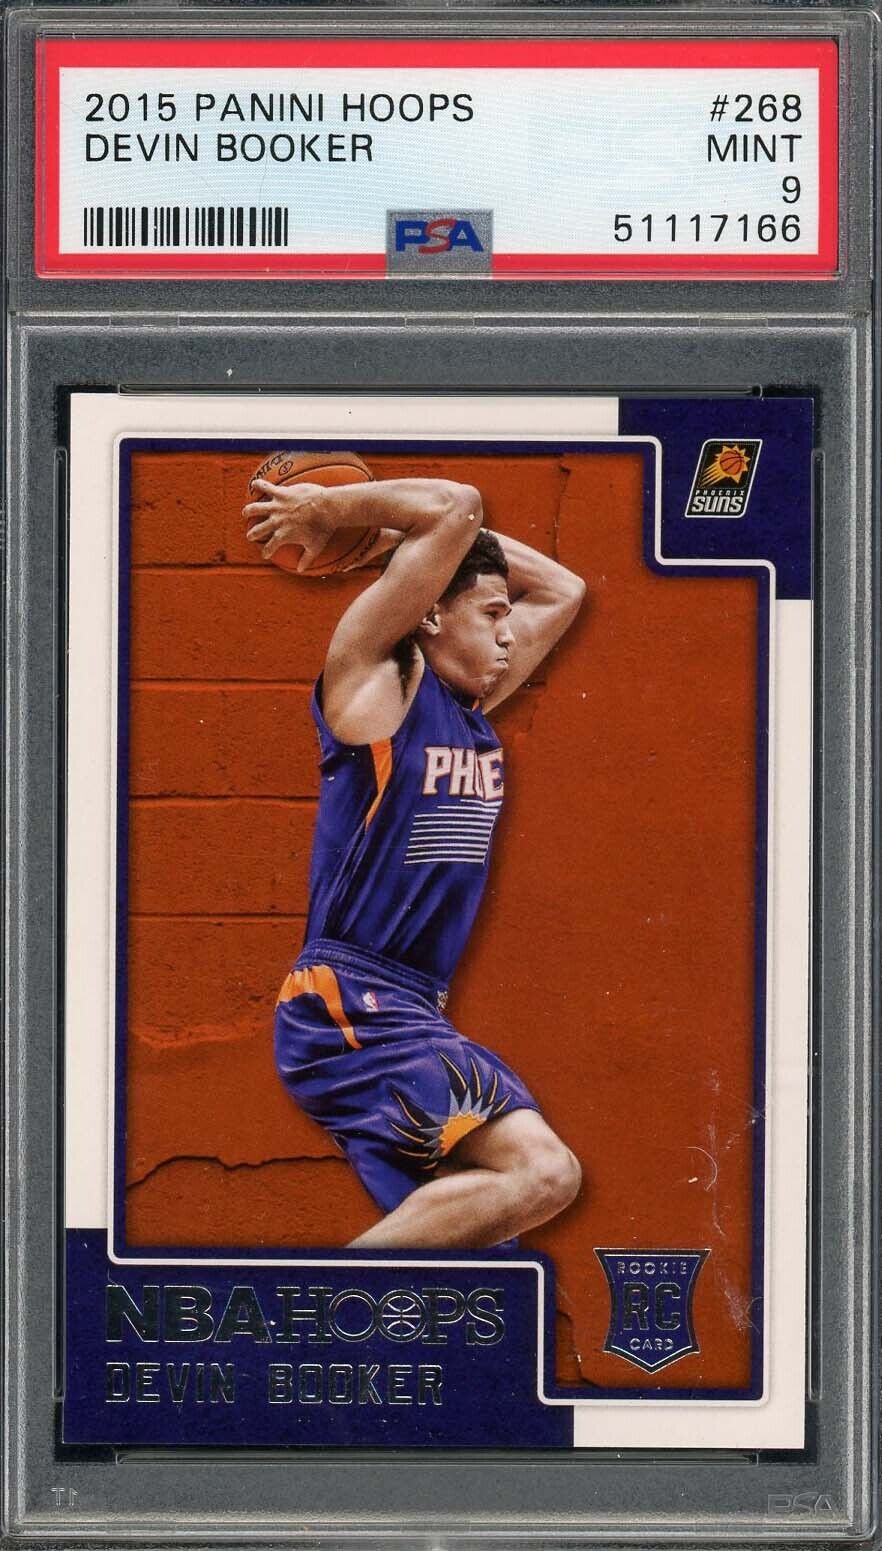 Devin Booker 2015 Panini Hoops Basketball Rookie Card RC #268 Graded PSA 9